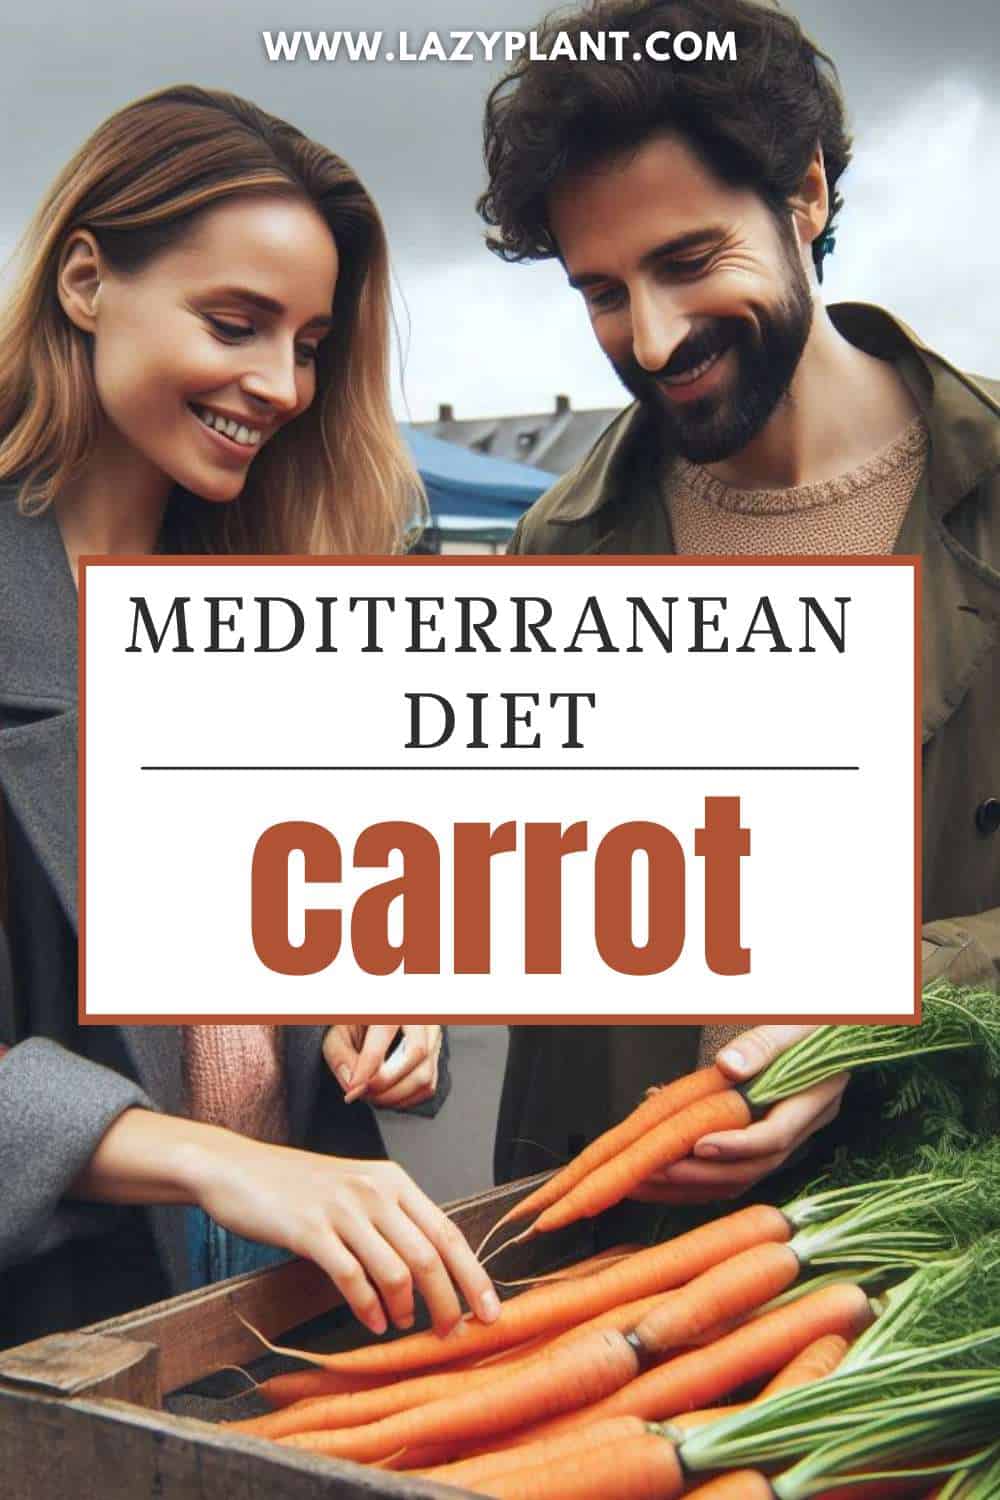 Carrots can be part of the Mediterranean Diet